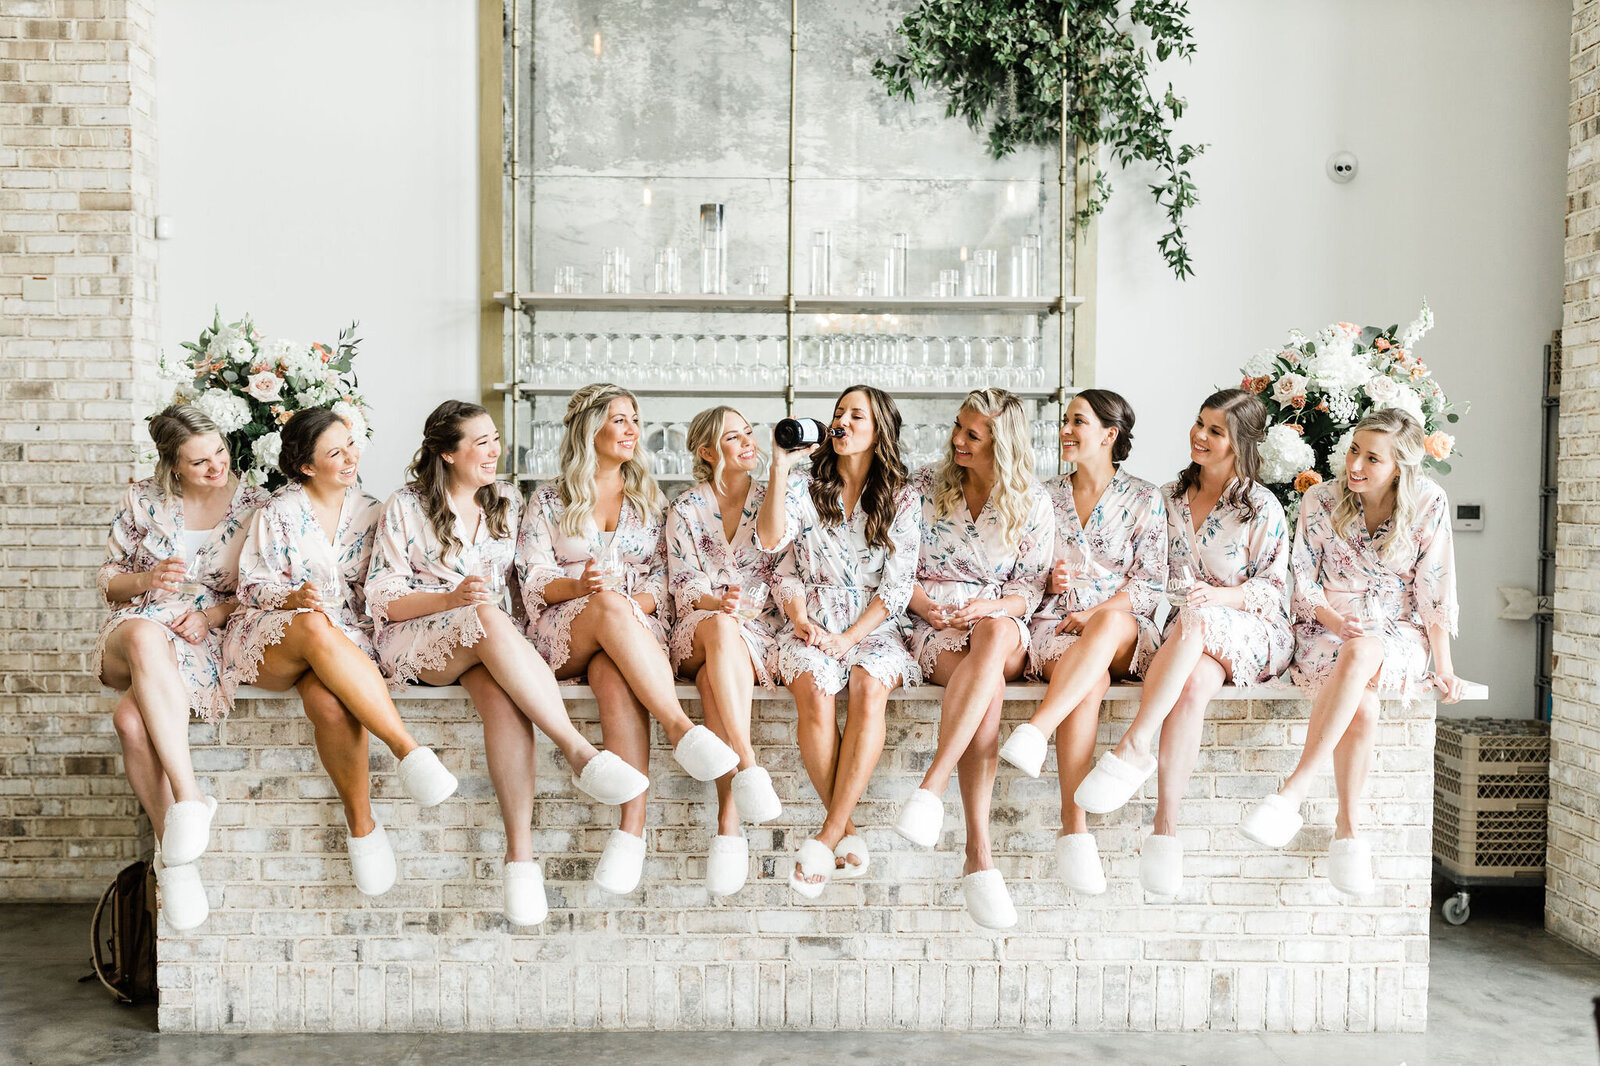 Cute Bridal Party Photos on a Bar | Wrightsville Manor, Wrightsville Beach NC | The Axtells Photo and Film